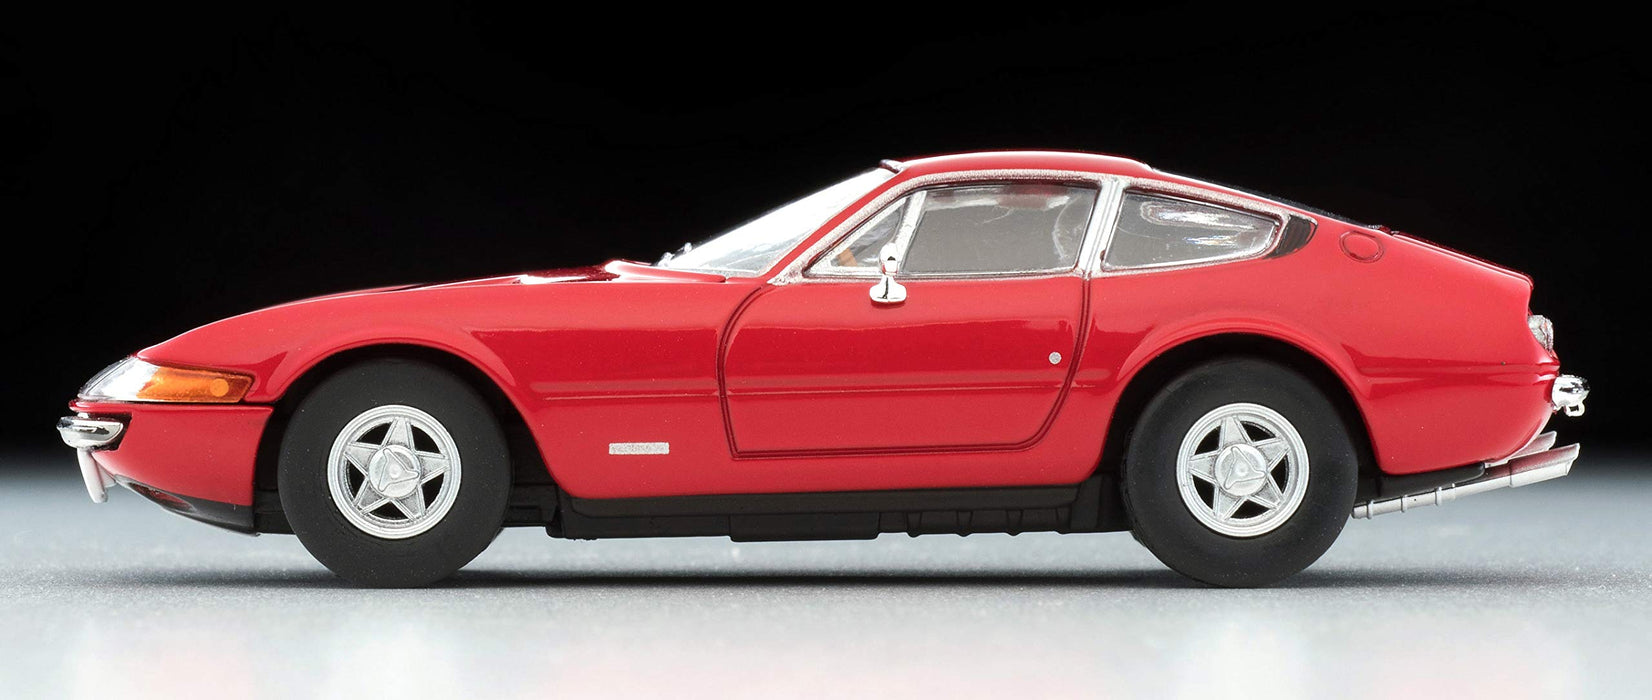 Tomytec Limited Vintage Ferrari 365 GTB4 Red 1/64 Scale Finished Product